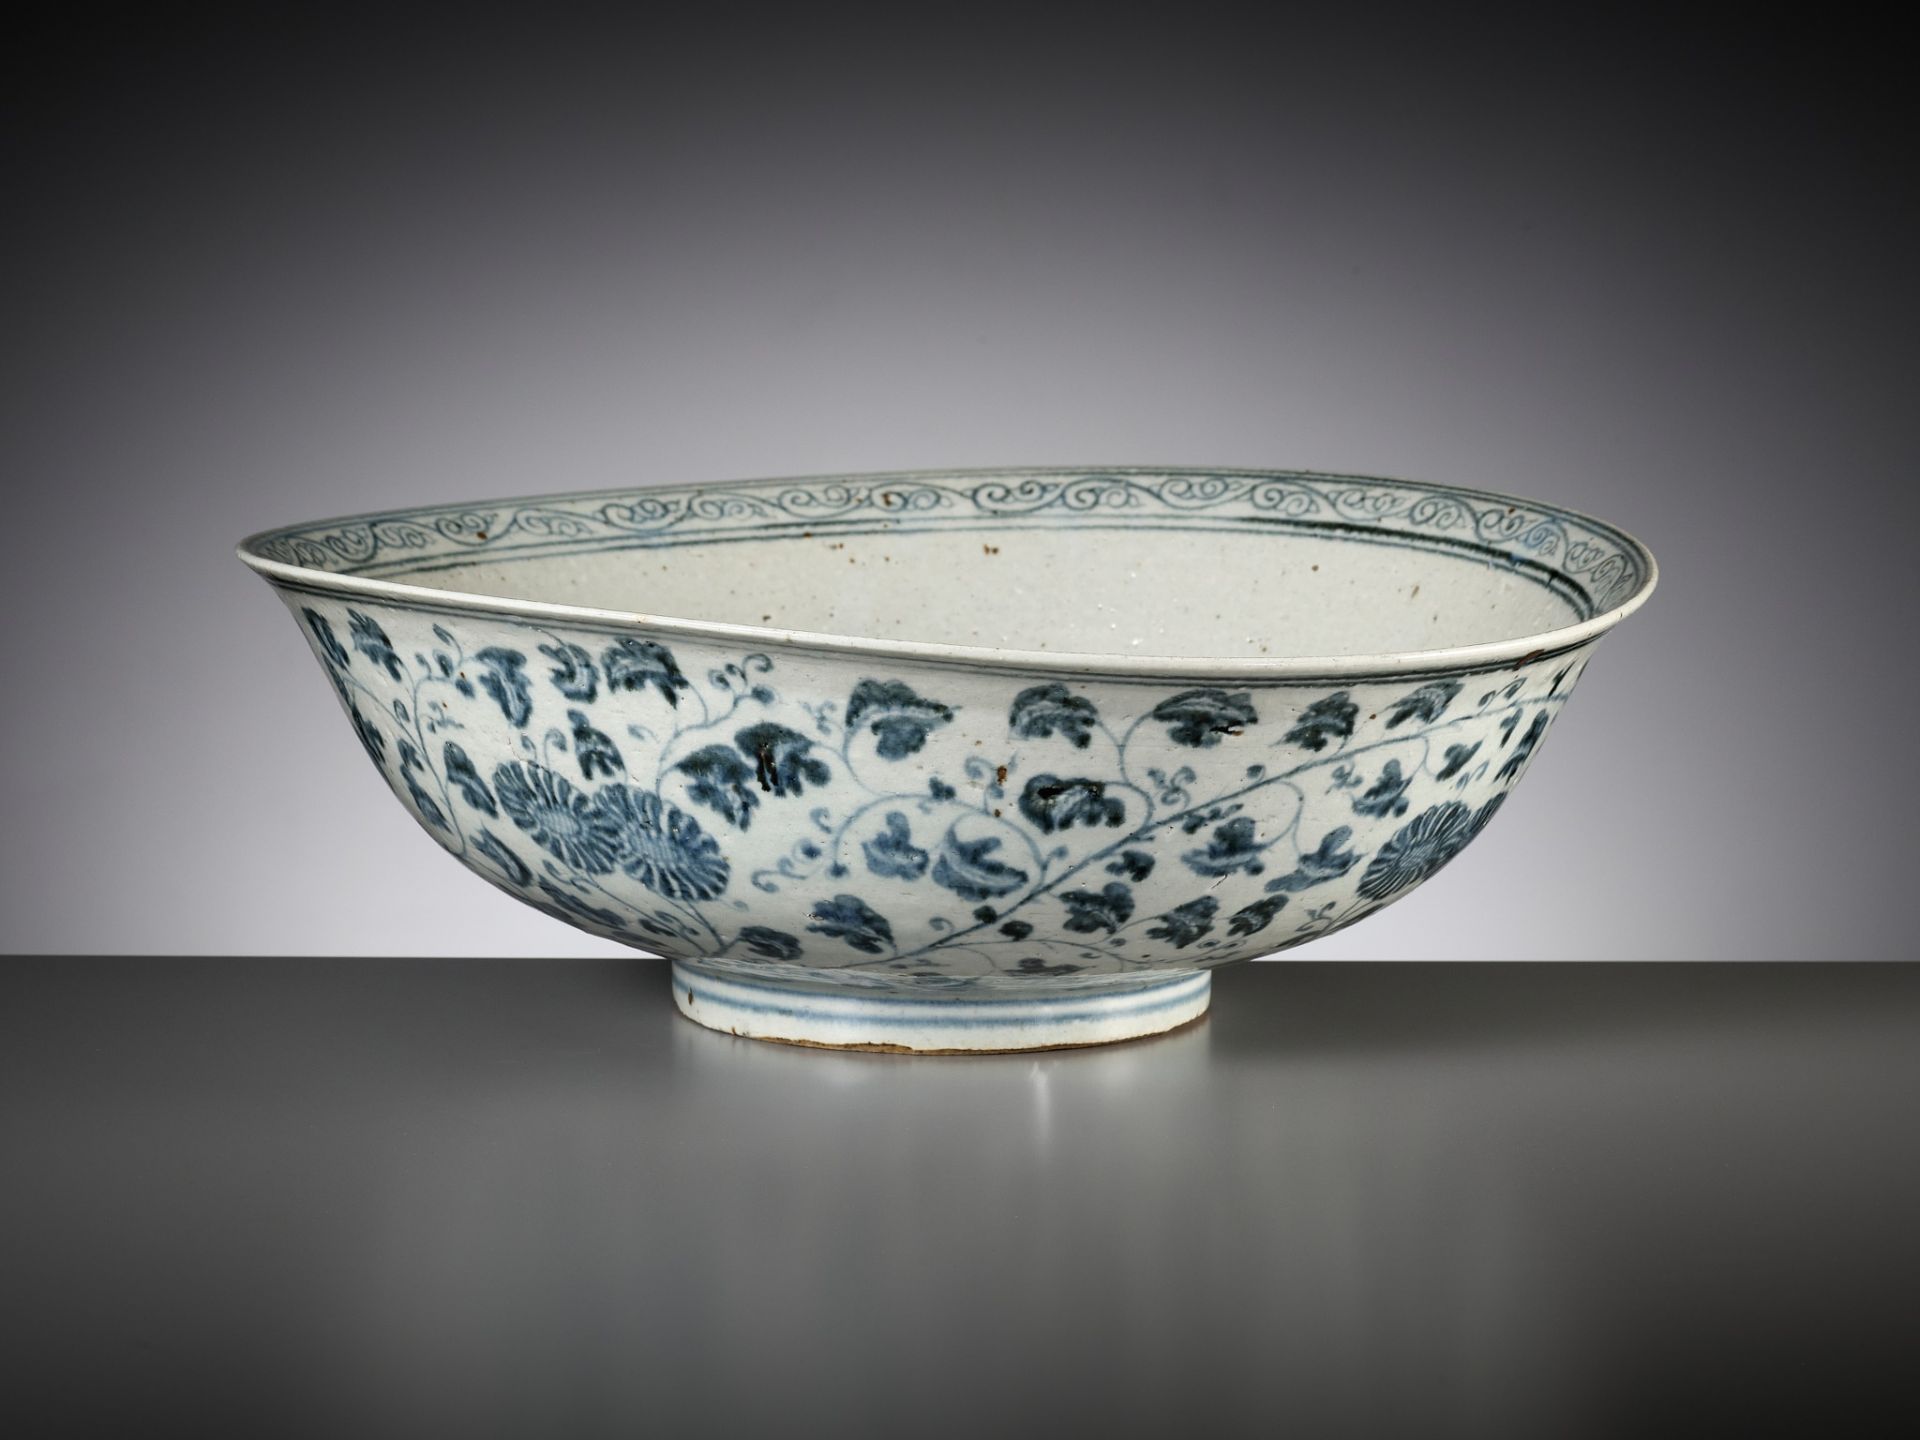 A LARGE ANNAMESE BLUE AND WHITE BOWL, VIETNAM, 14TH-15TH CENTURY - Image 10 of 12